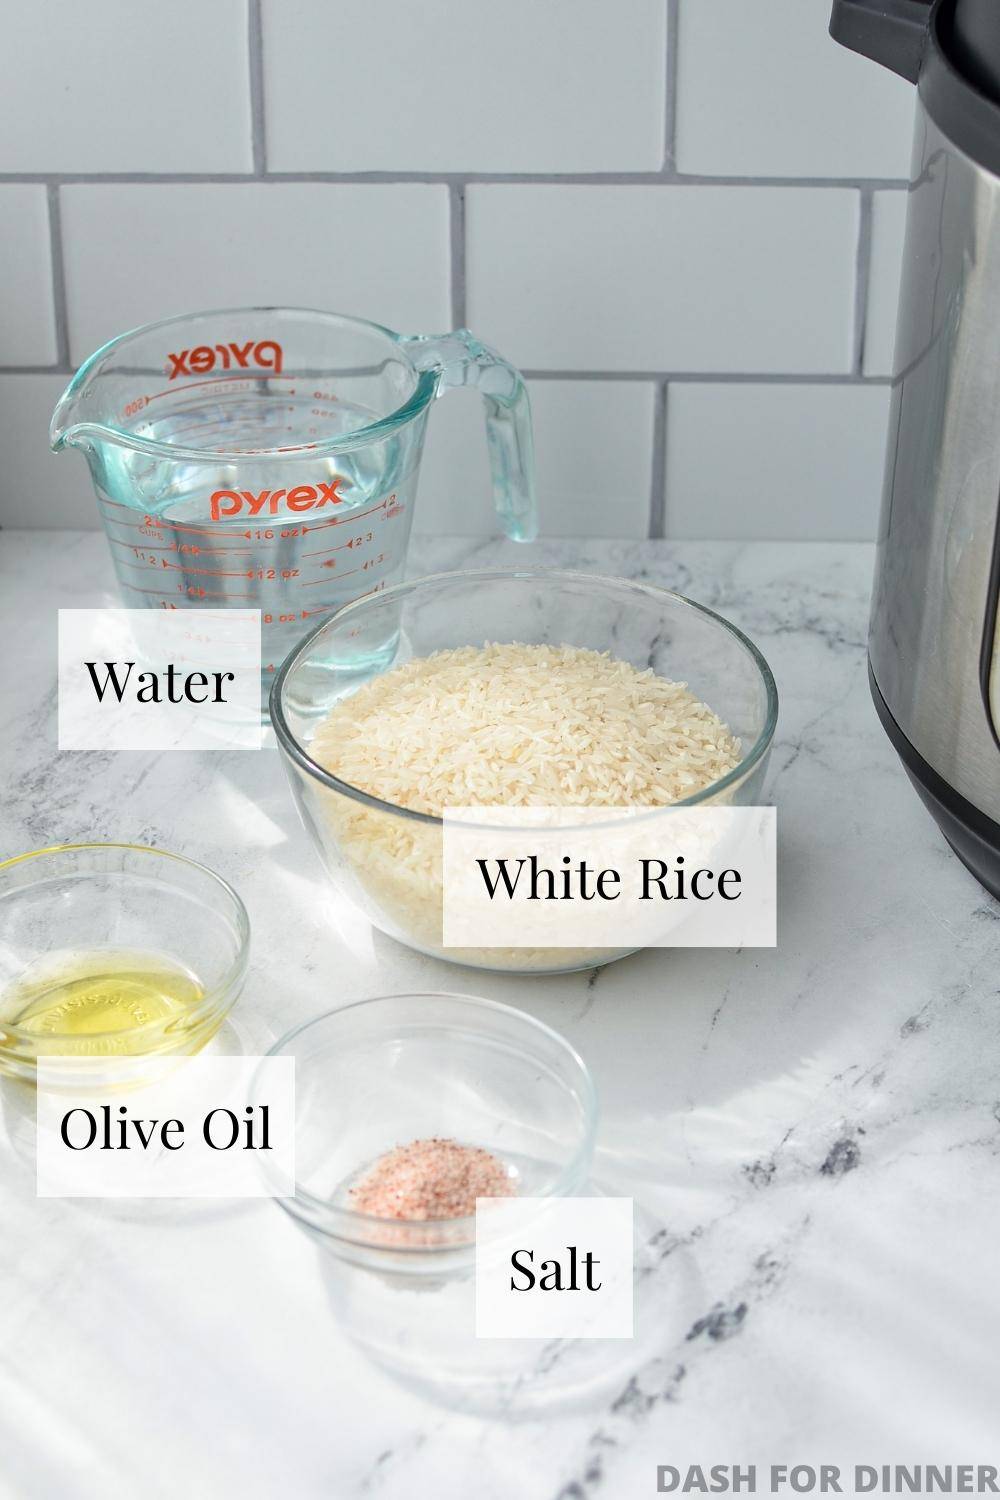 The ingredients needed to make Instant Pot white rice.